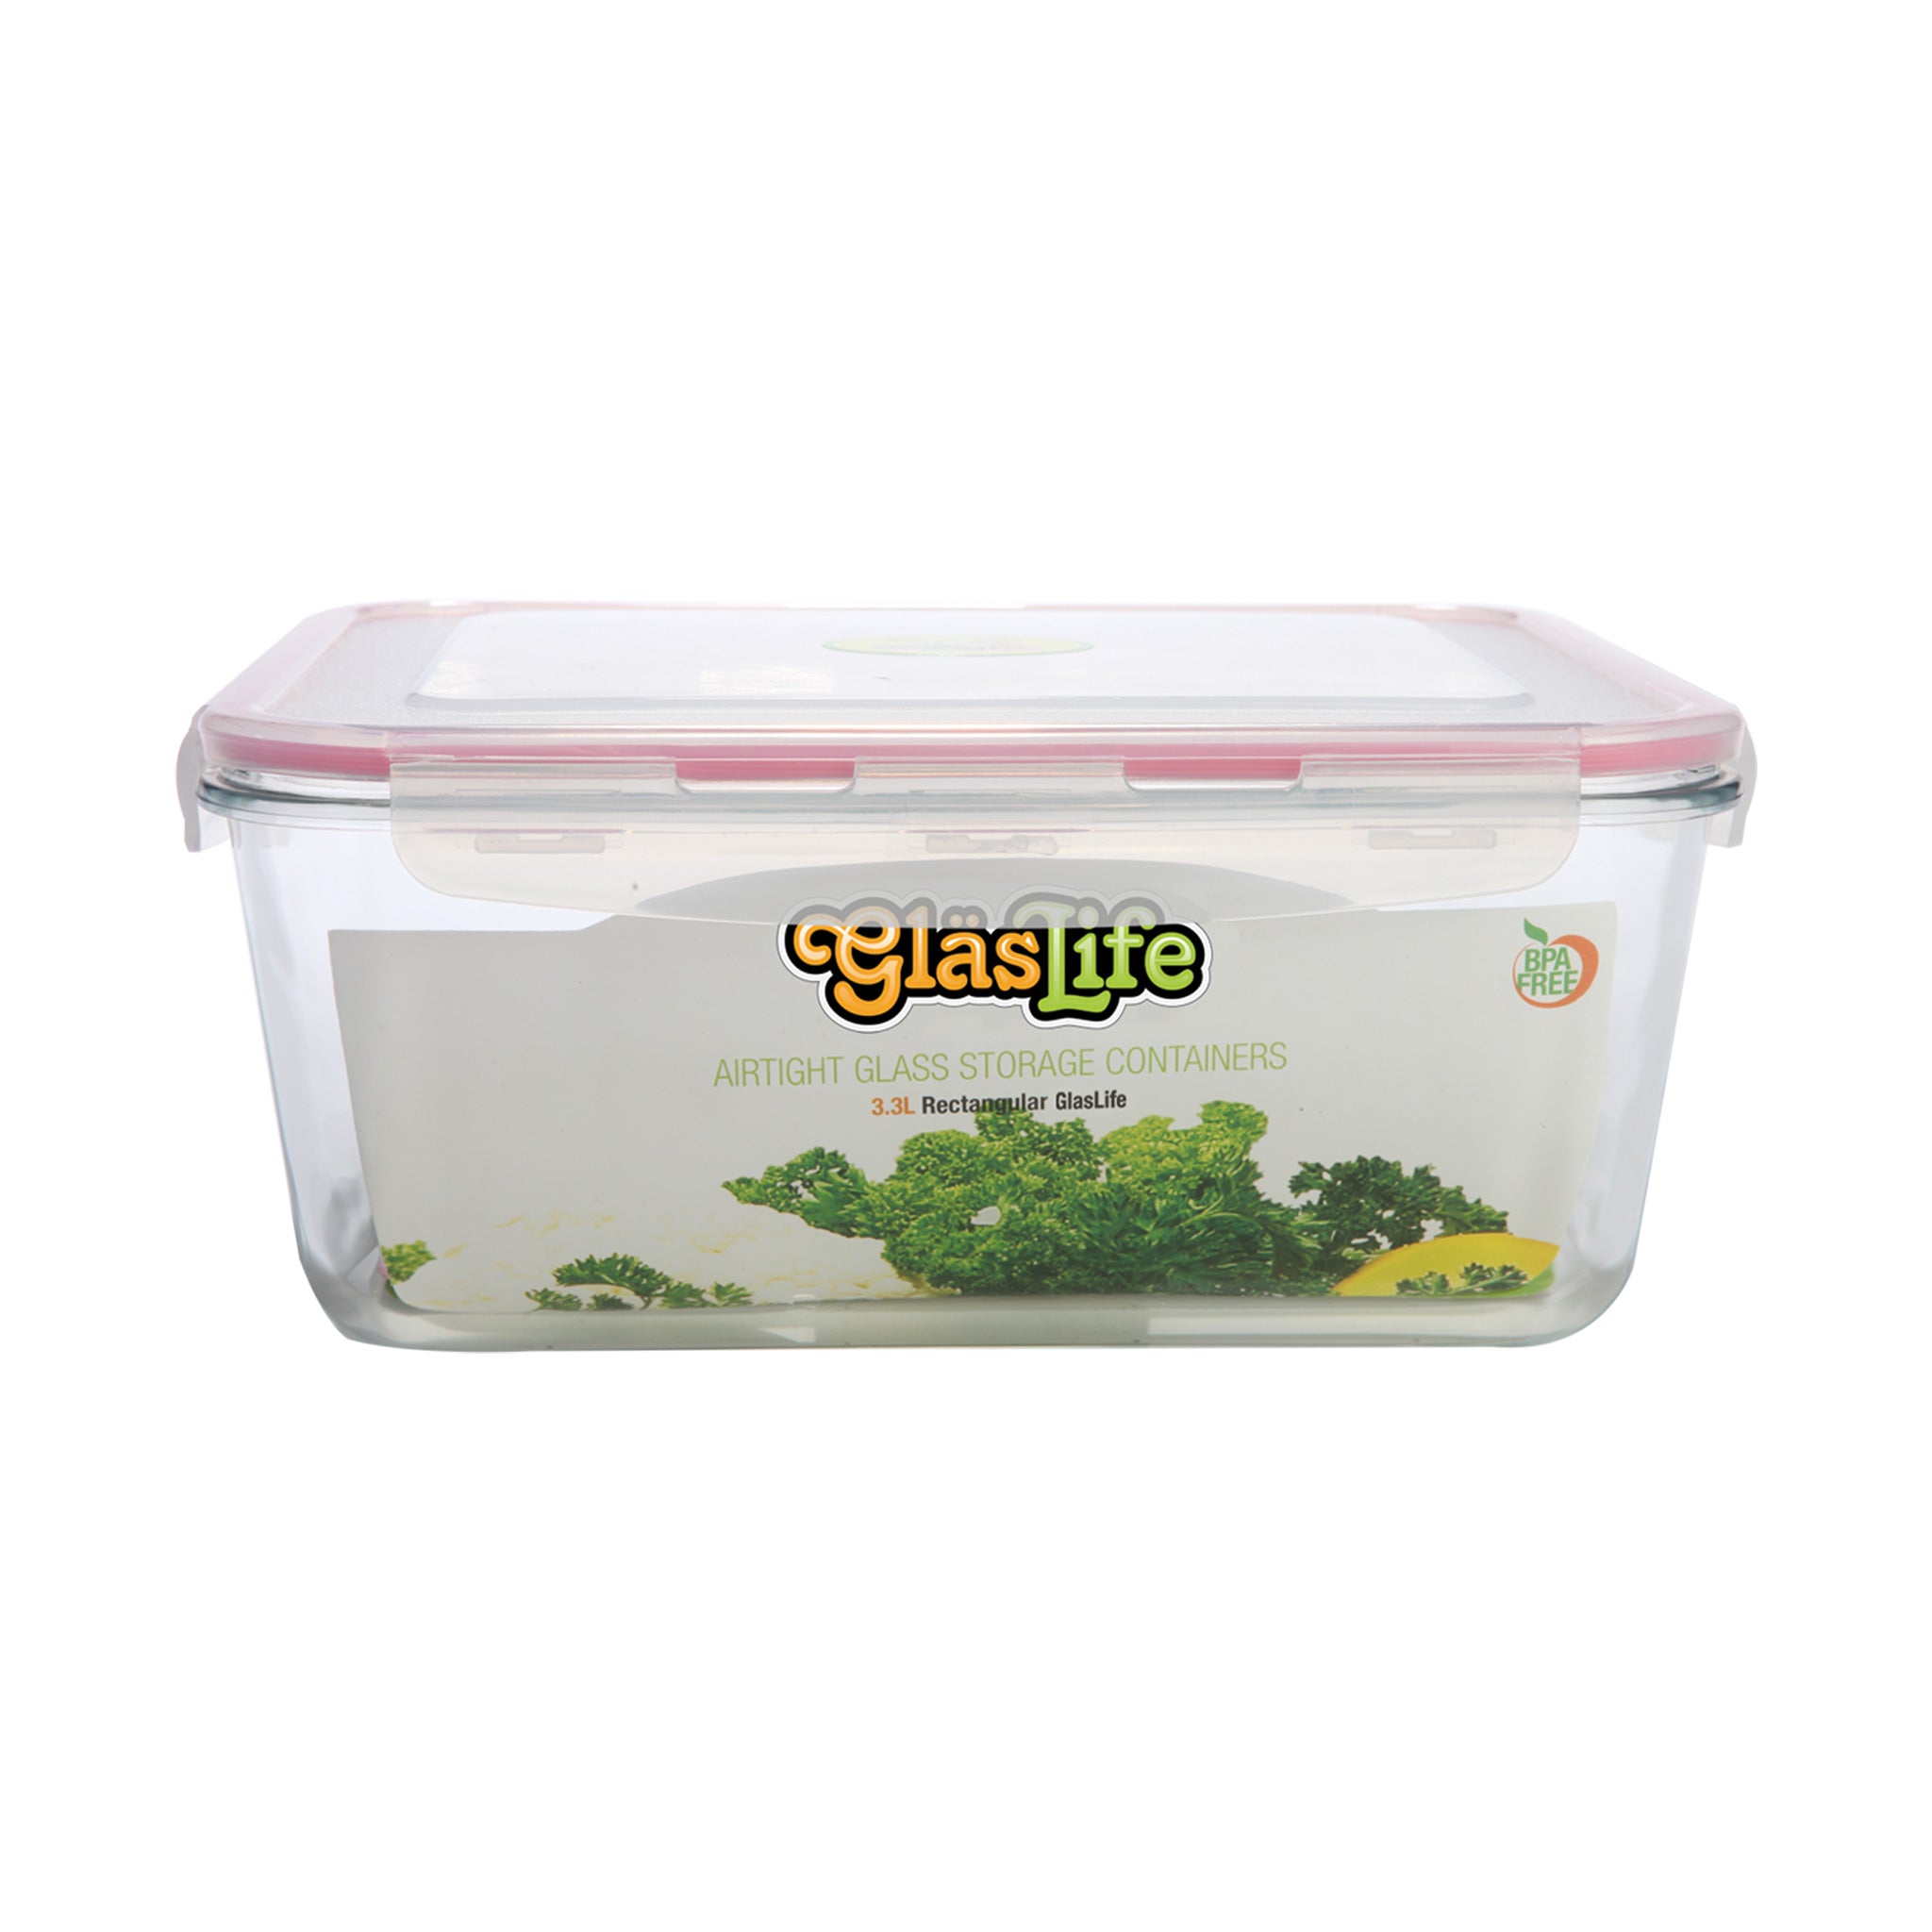 NEW Large Airtight Food Storage Containers with Lids - Air Tight